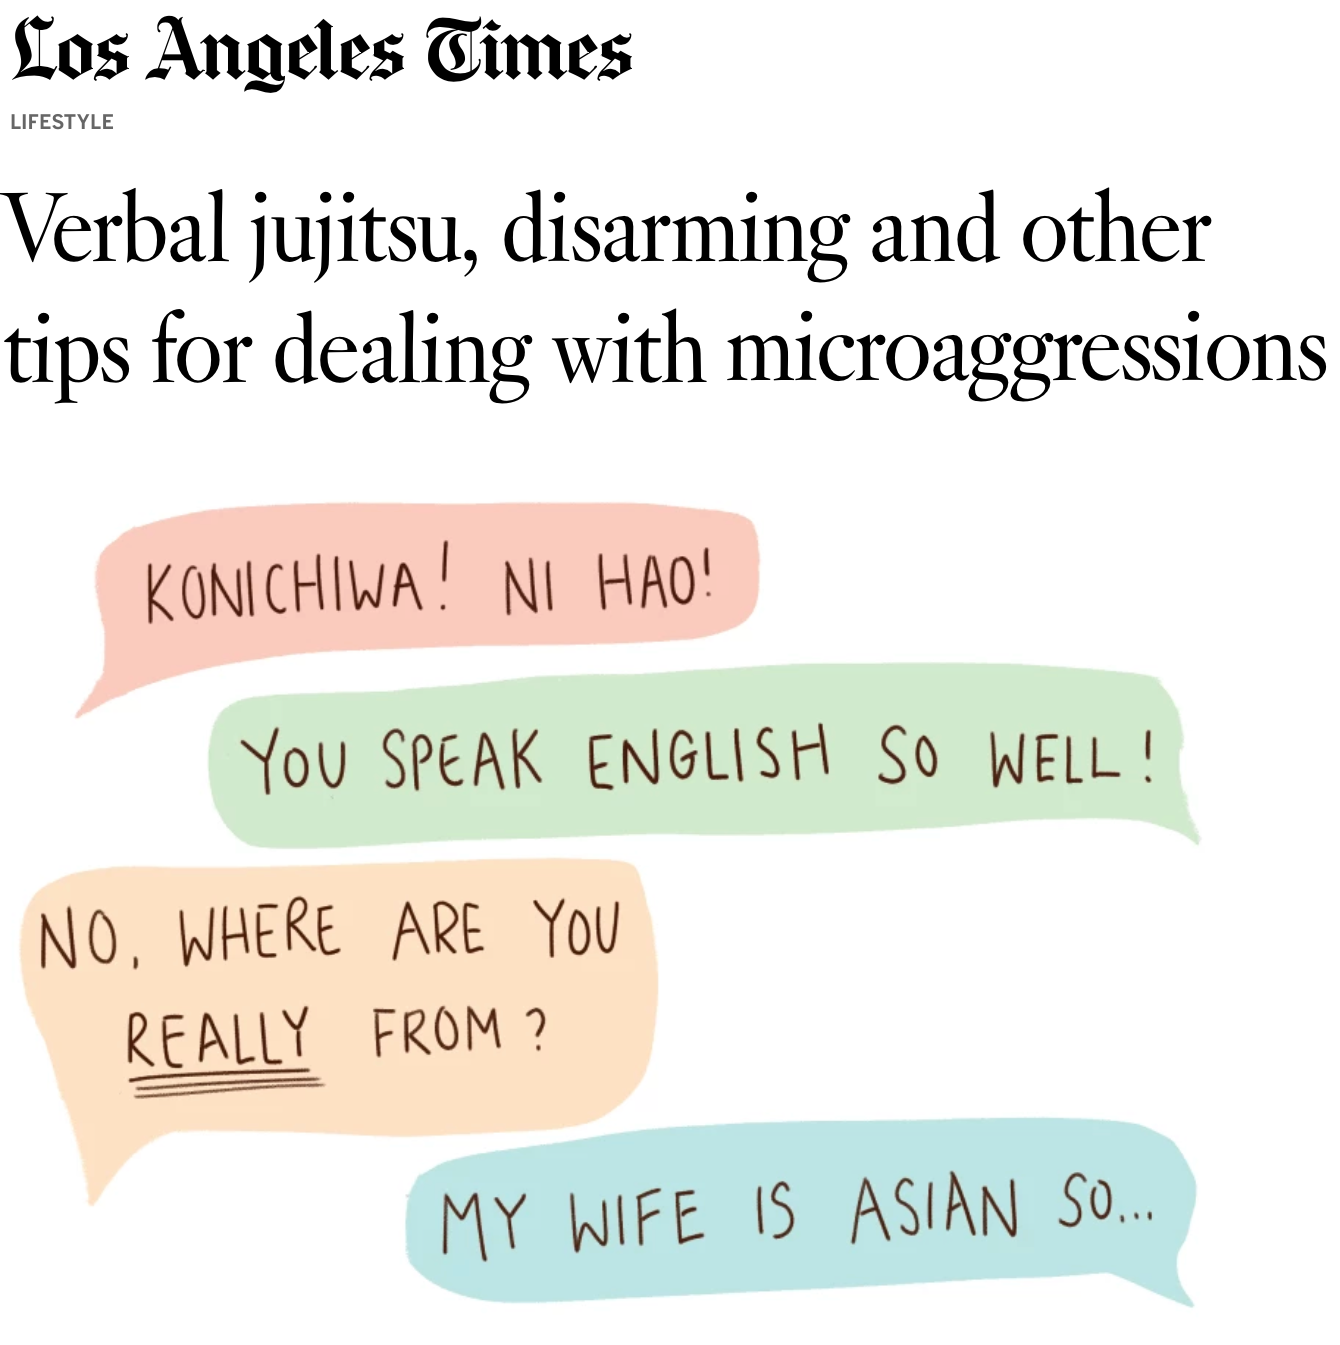 Verbal jujitsu, disarming and other tips for dealing with microaggressions